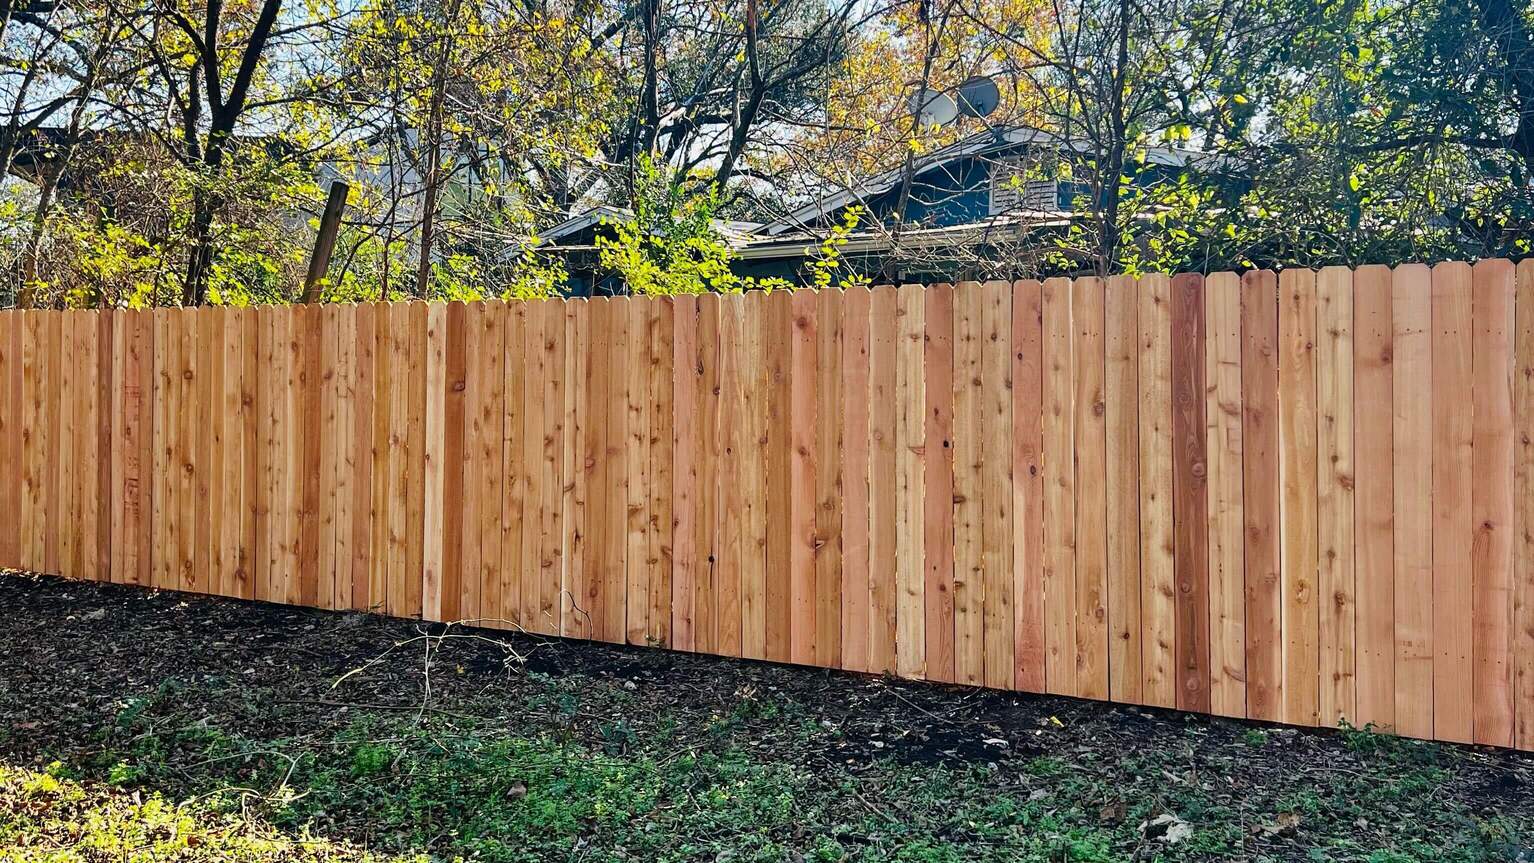 six foot privacy fence with dog ear style pickets